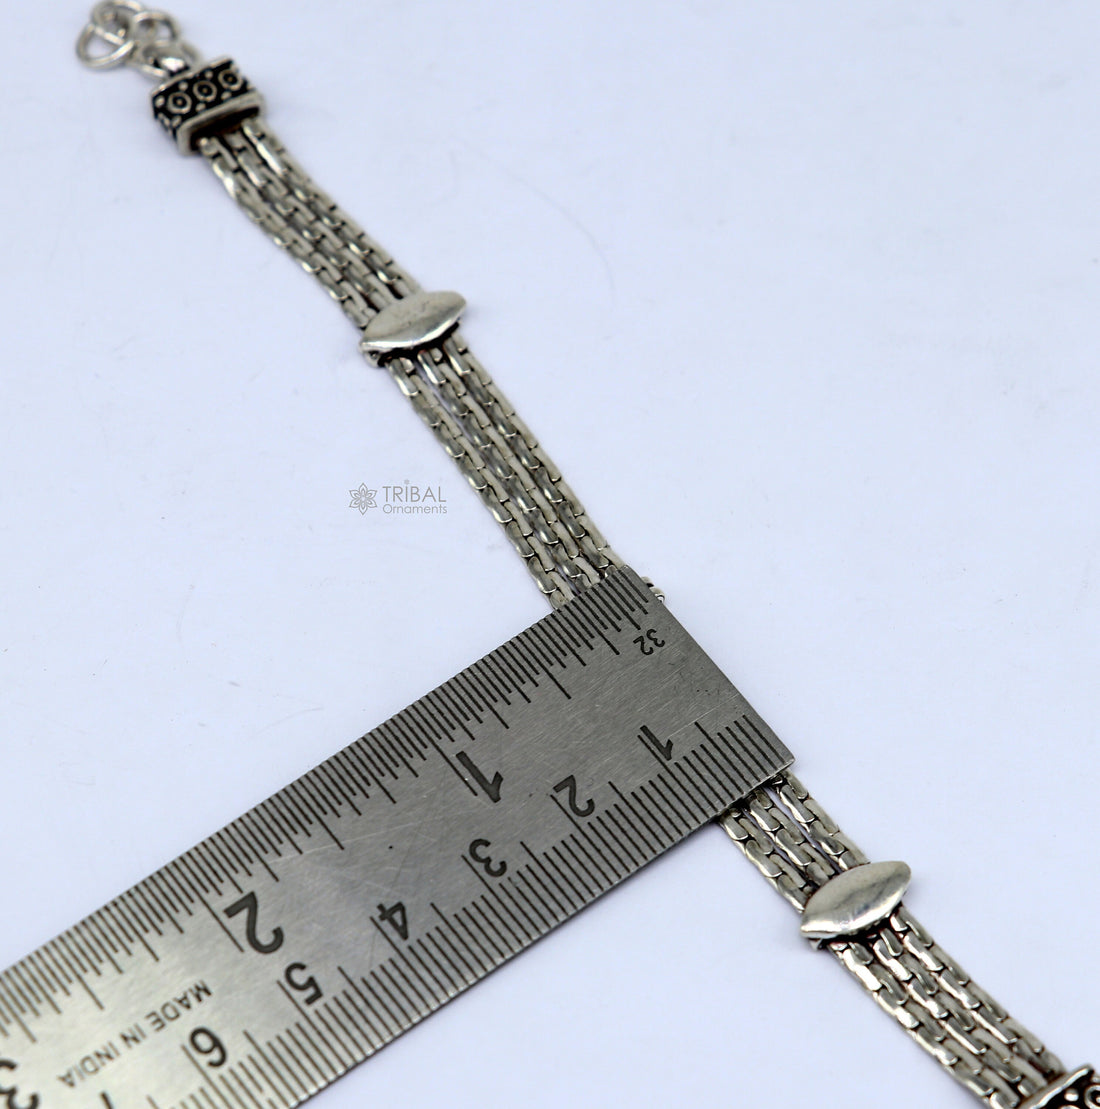 Vintage designer 925 sterling silver handmade 3 line chain 8 inches customized bracelet, Amazing oxidized personalized gift sbr697 - TRIBAL ORNAMENTS